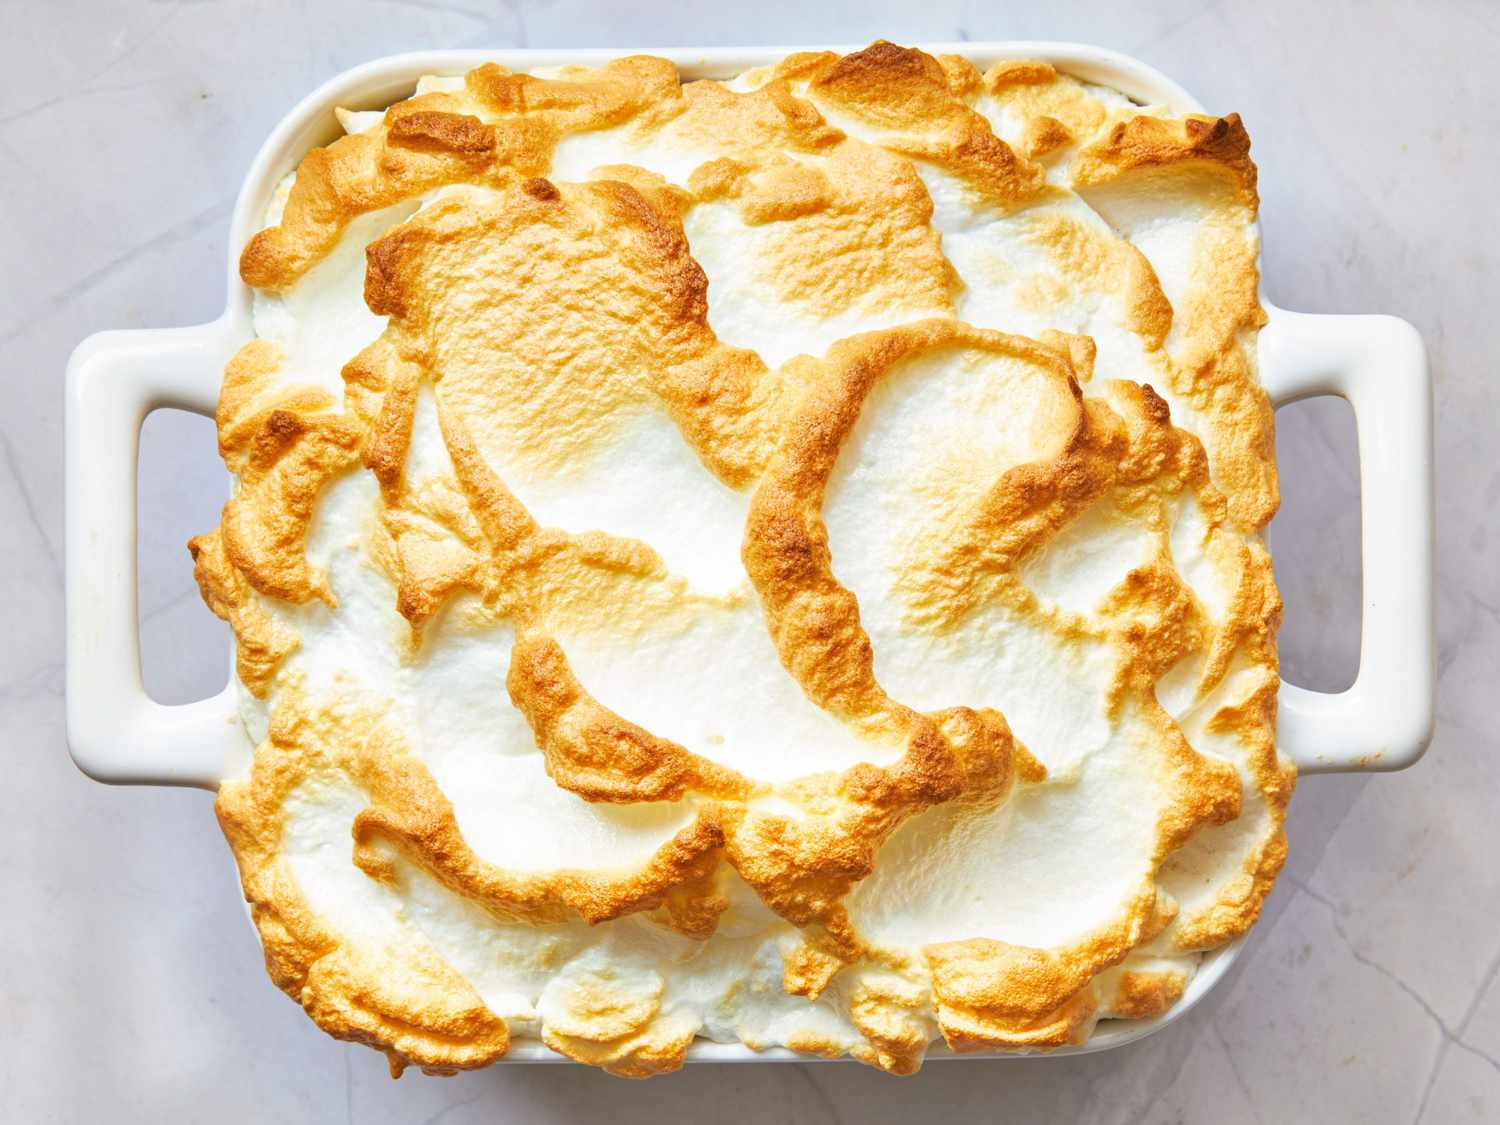 Banana pudding, a classic Southern dessert, has a history rooted in American culinary traditions